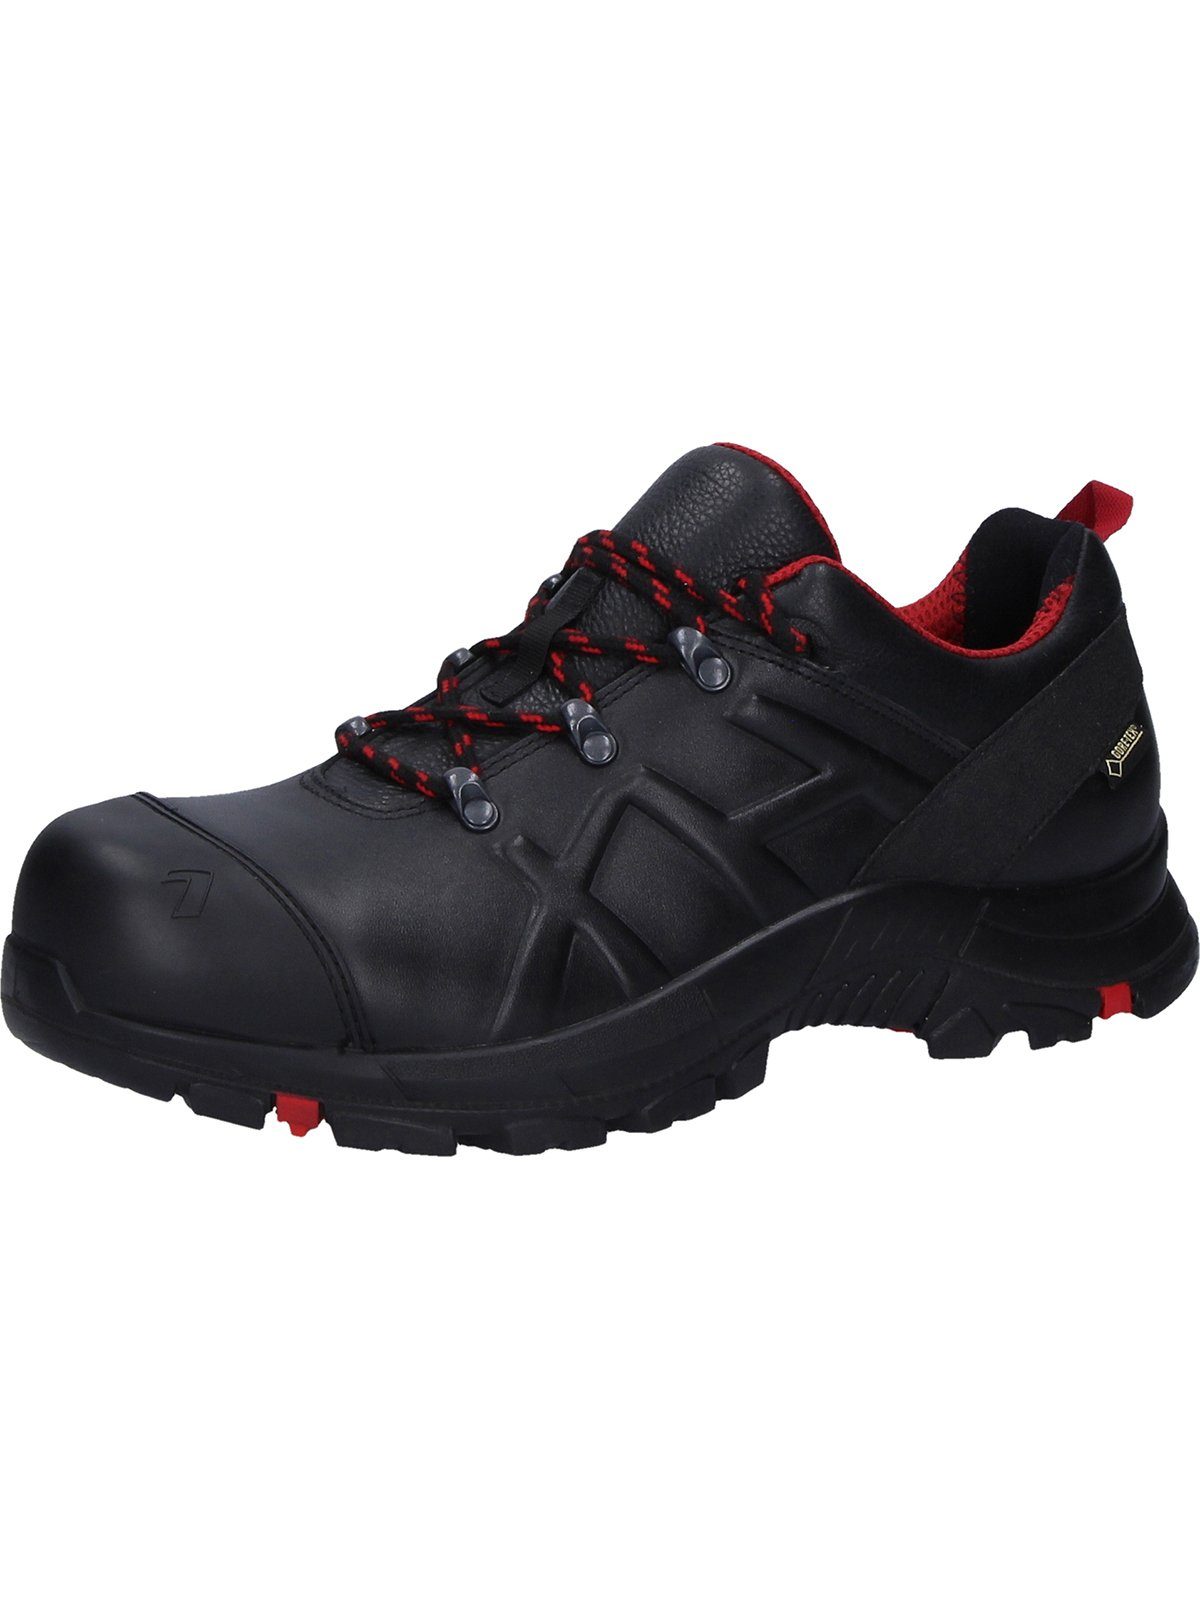 haix Arbeitsschuh black/red Black Safety Eagle low 54